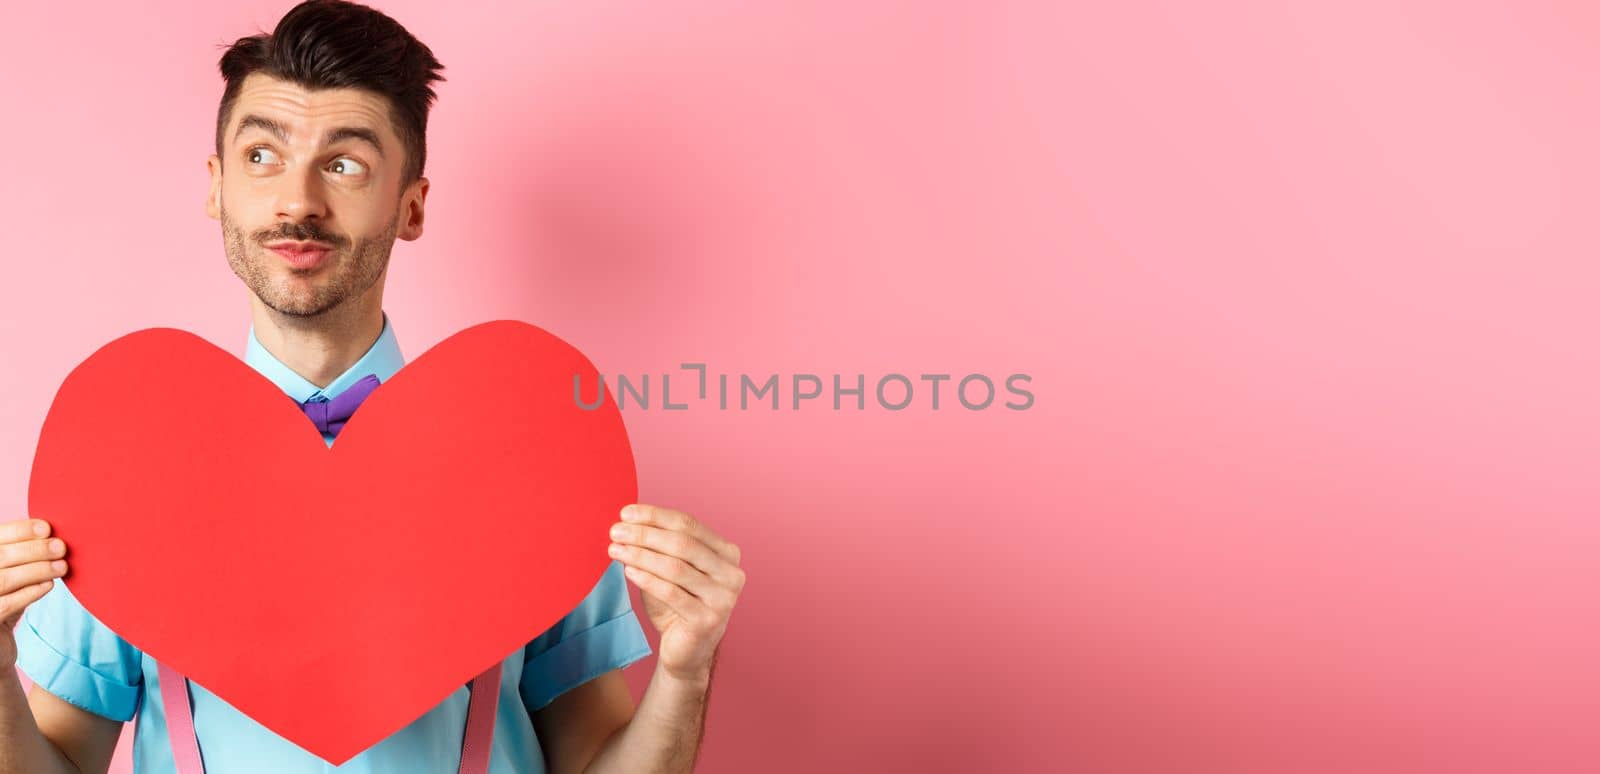 Valentines day concept. Dreamy romantic man looking left and showing big red heart cutout, standing on pink background.